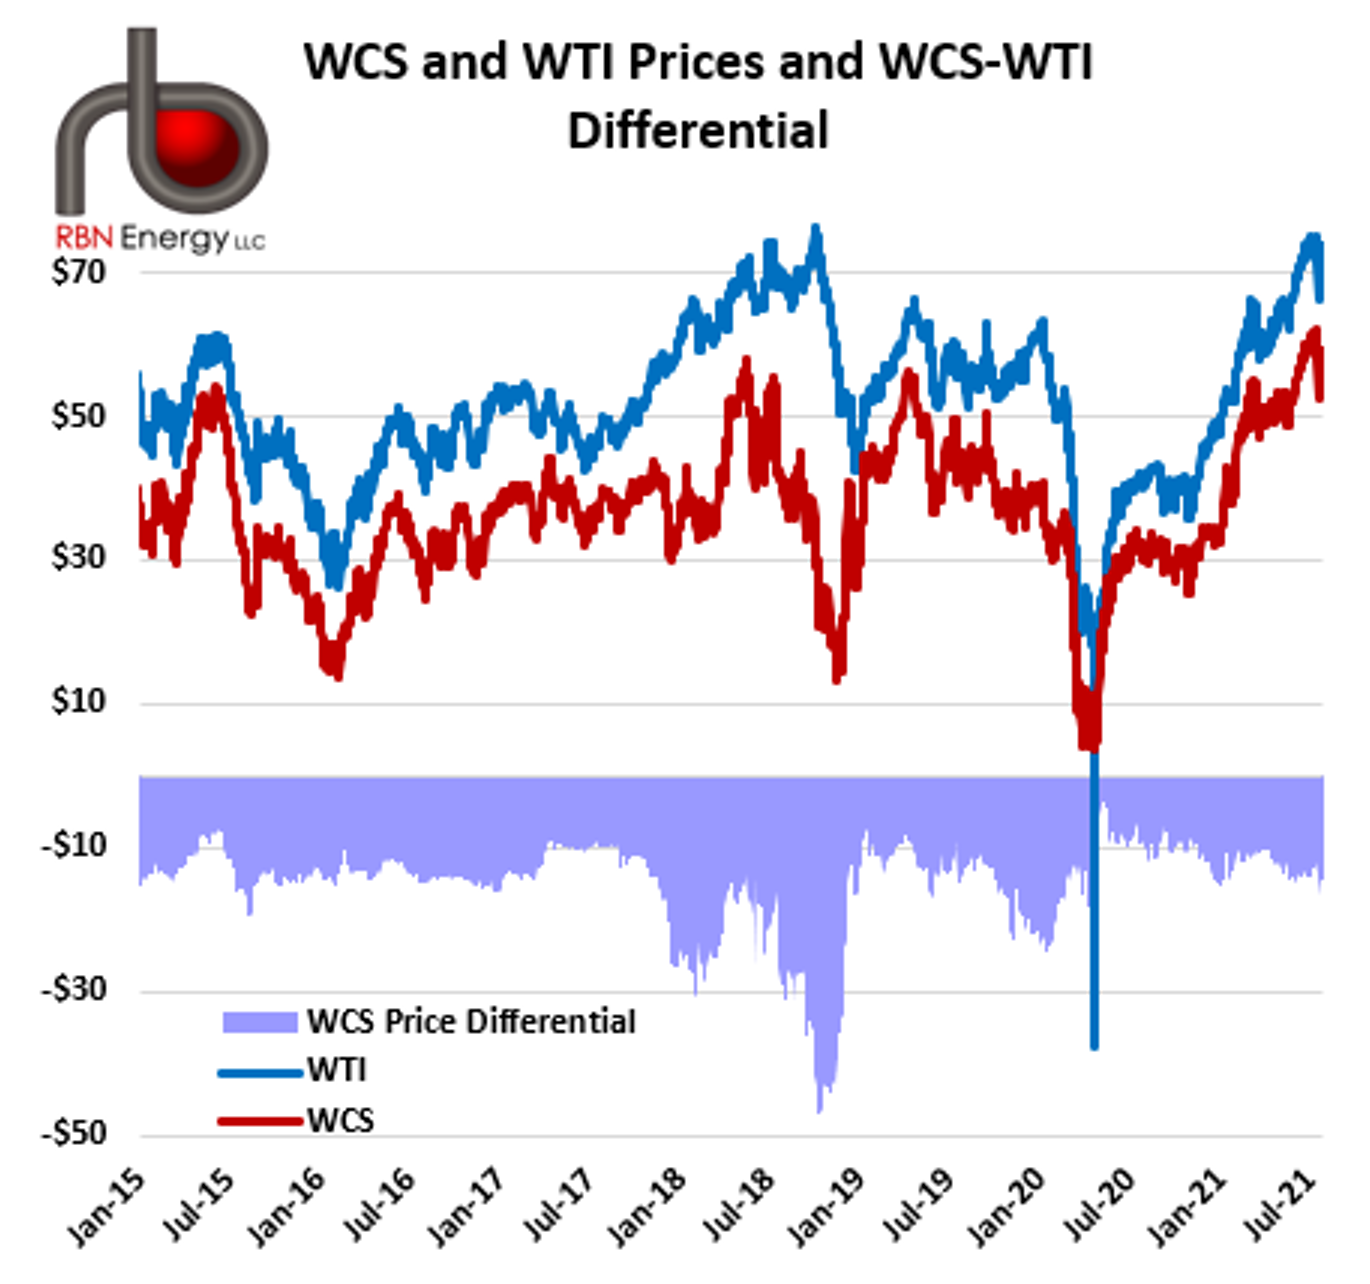 WCS/WTI differentials will likely widen as Canadian energy becomes more expensive to produce, compounded by existing transportation infrastructure challenges.  